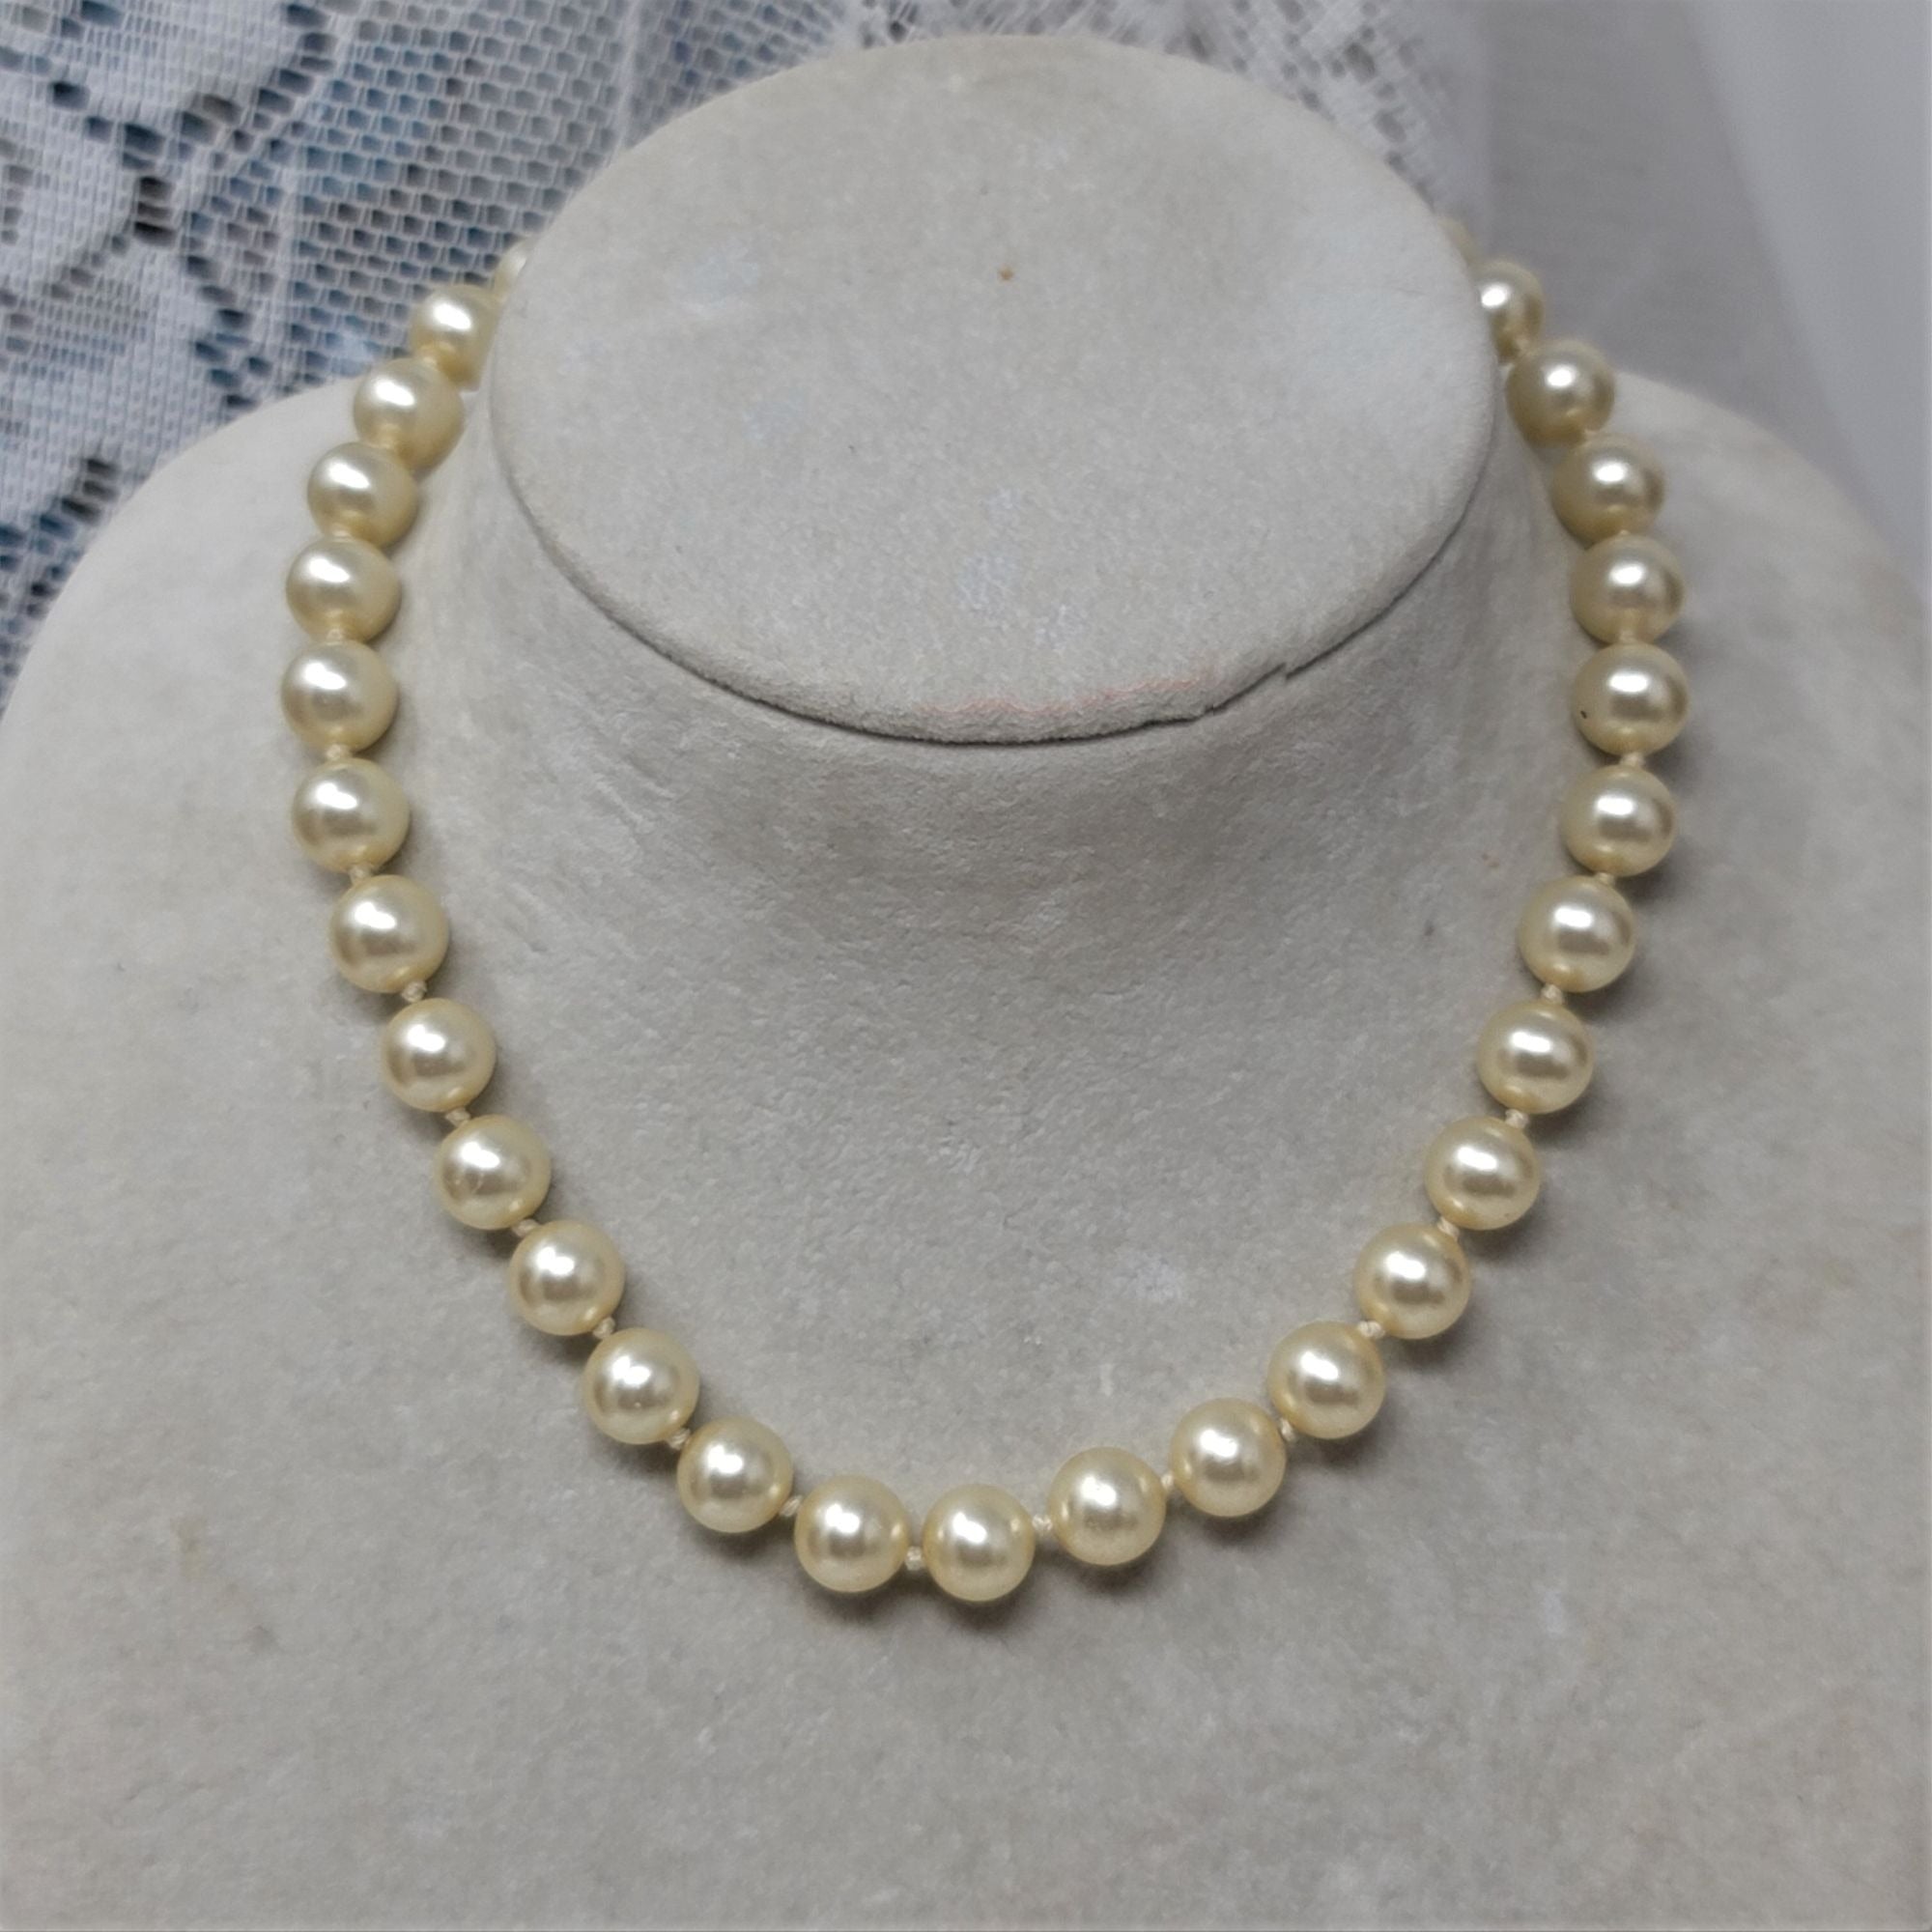 Vintage 10mm Faux Pearl Necklace Knotted Silver Clasp